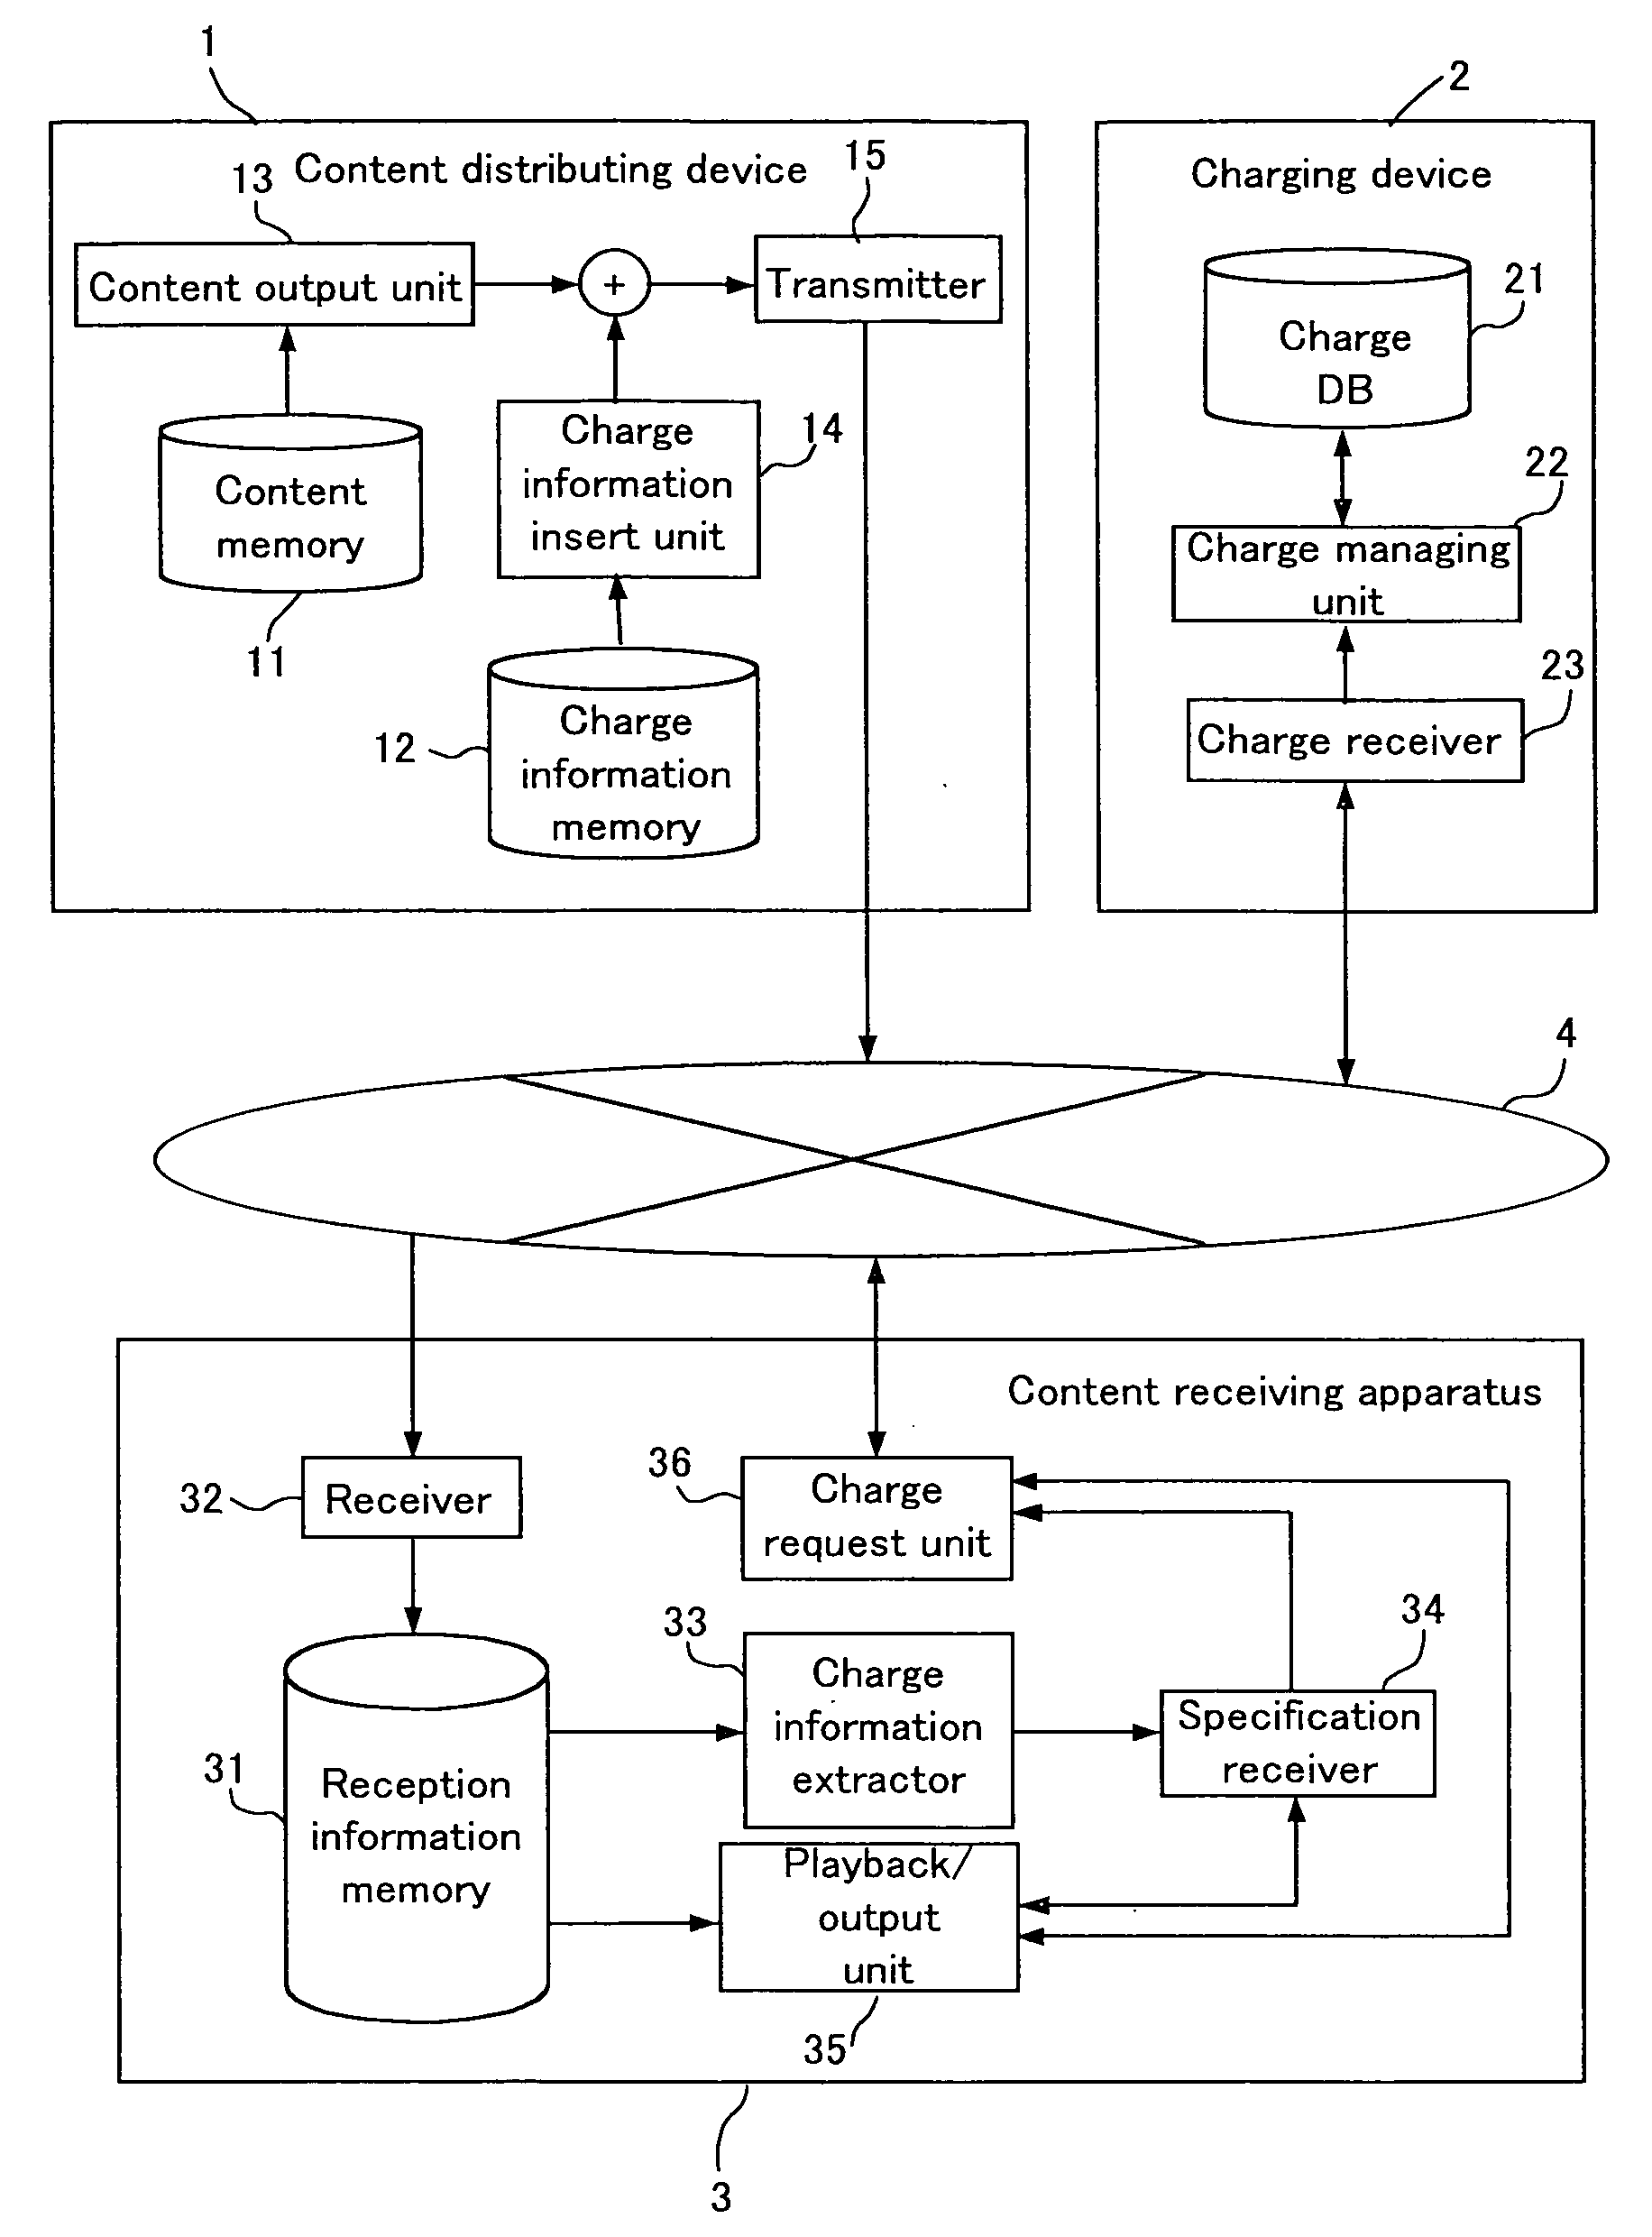 Content receiving apparatus and method